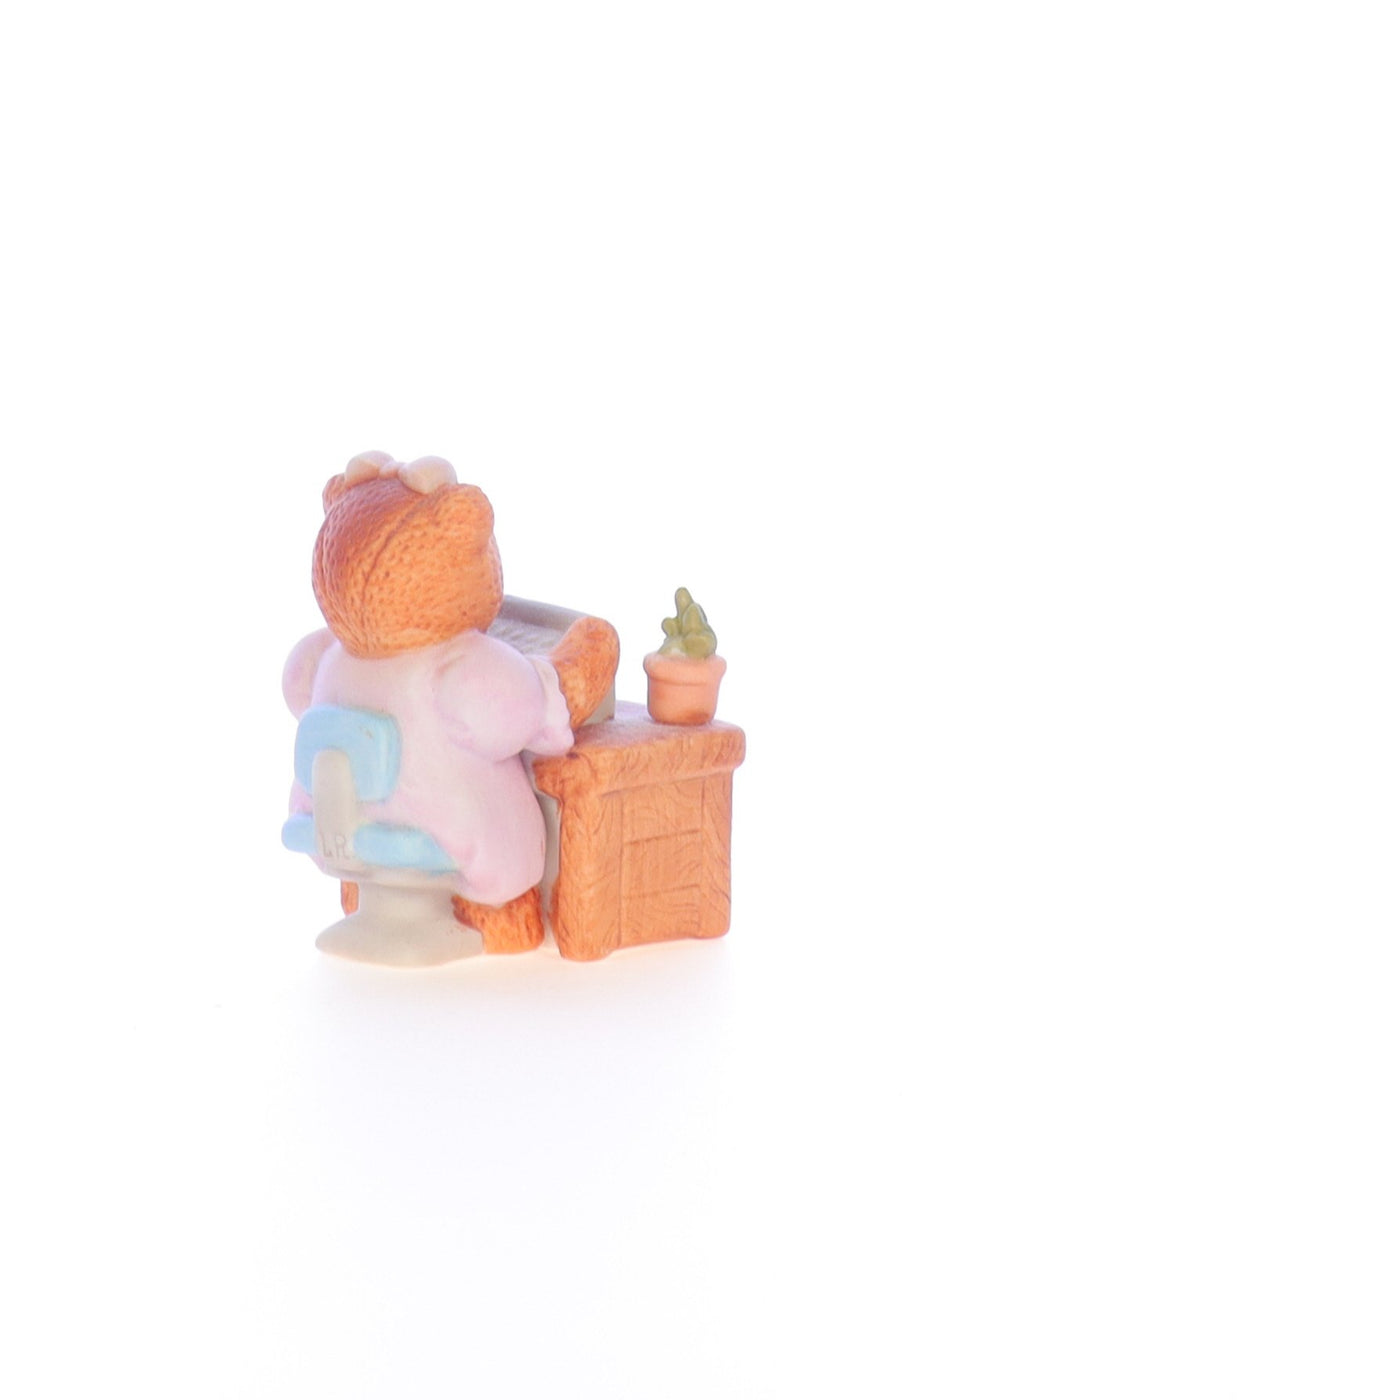 Lucy_And_Me_by_Lucy_Atwell_Porcelain_Figurine_Secretary_Bear_Lucy_Unknown_057_06